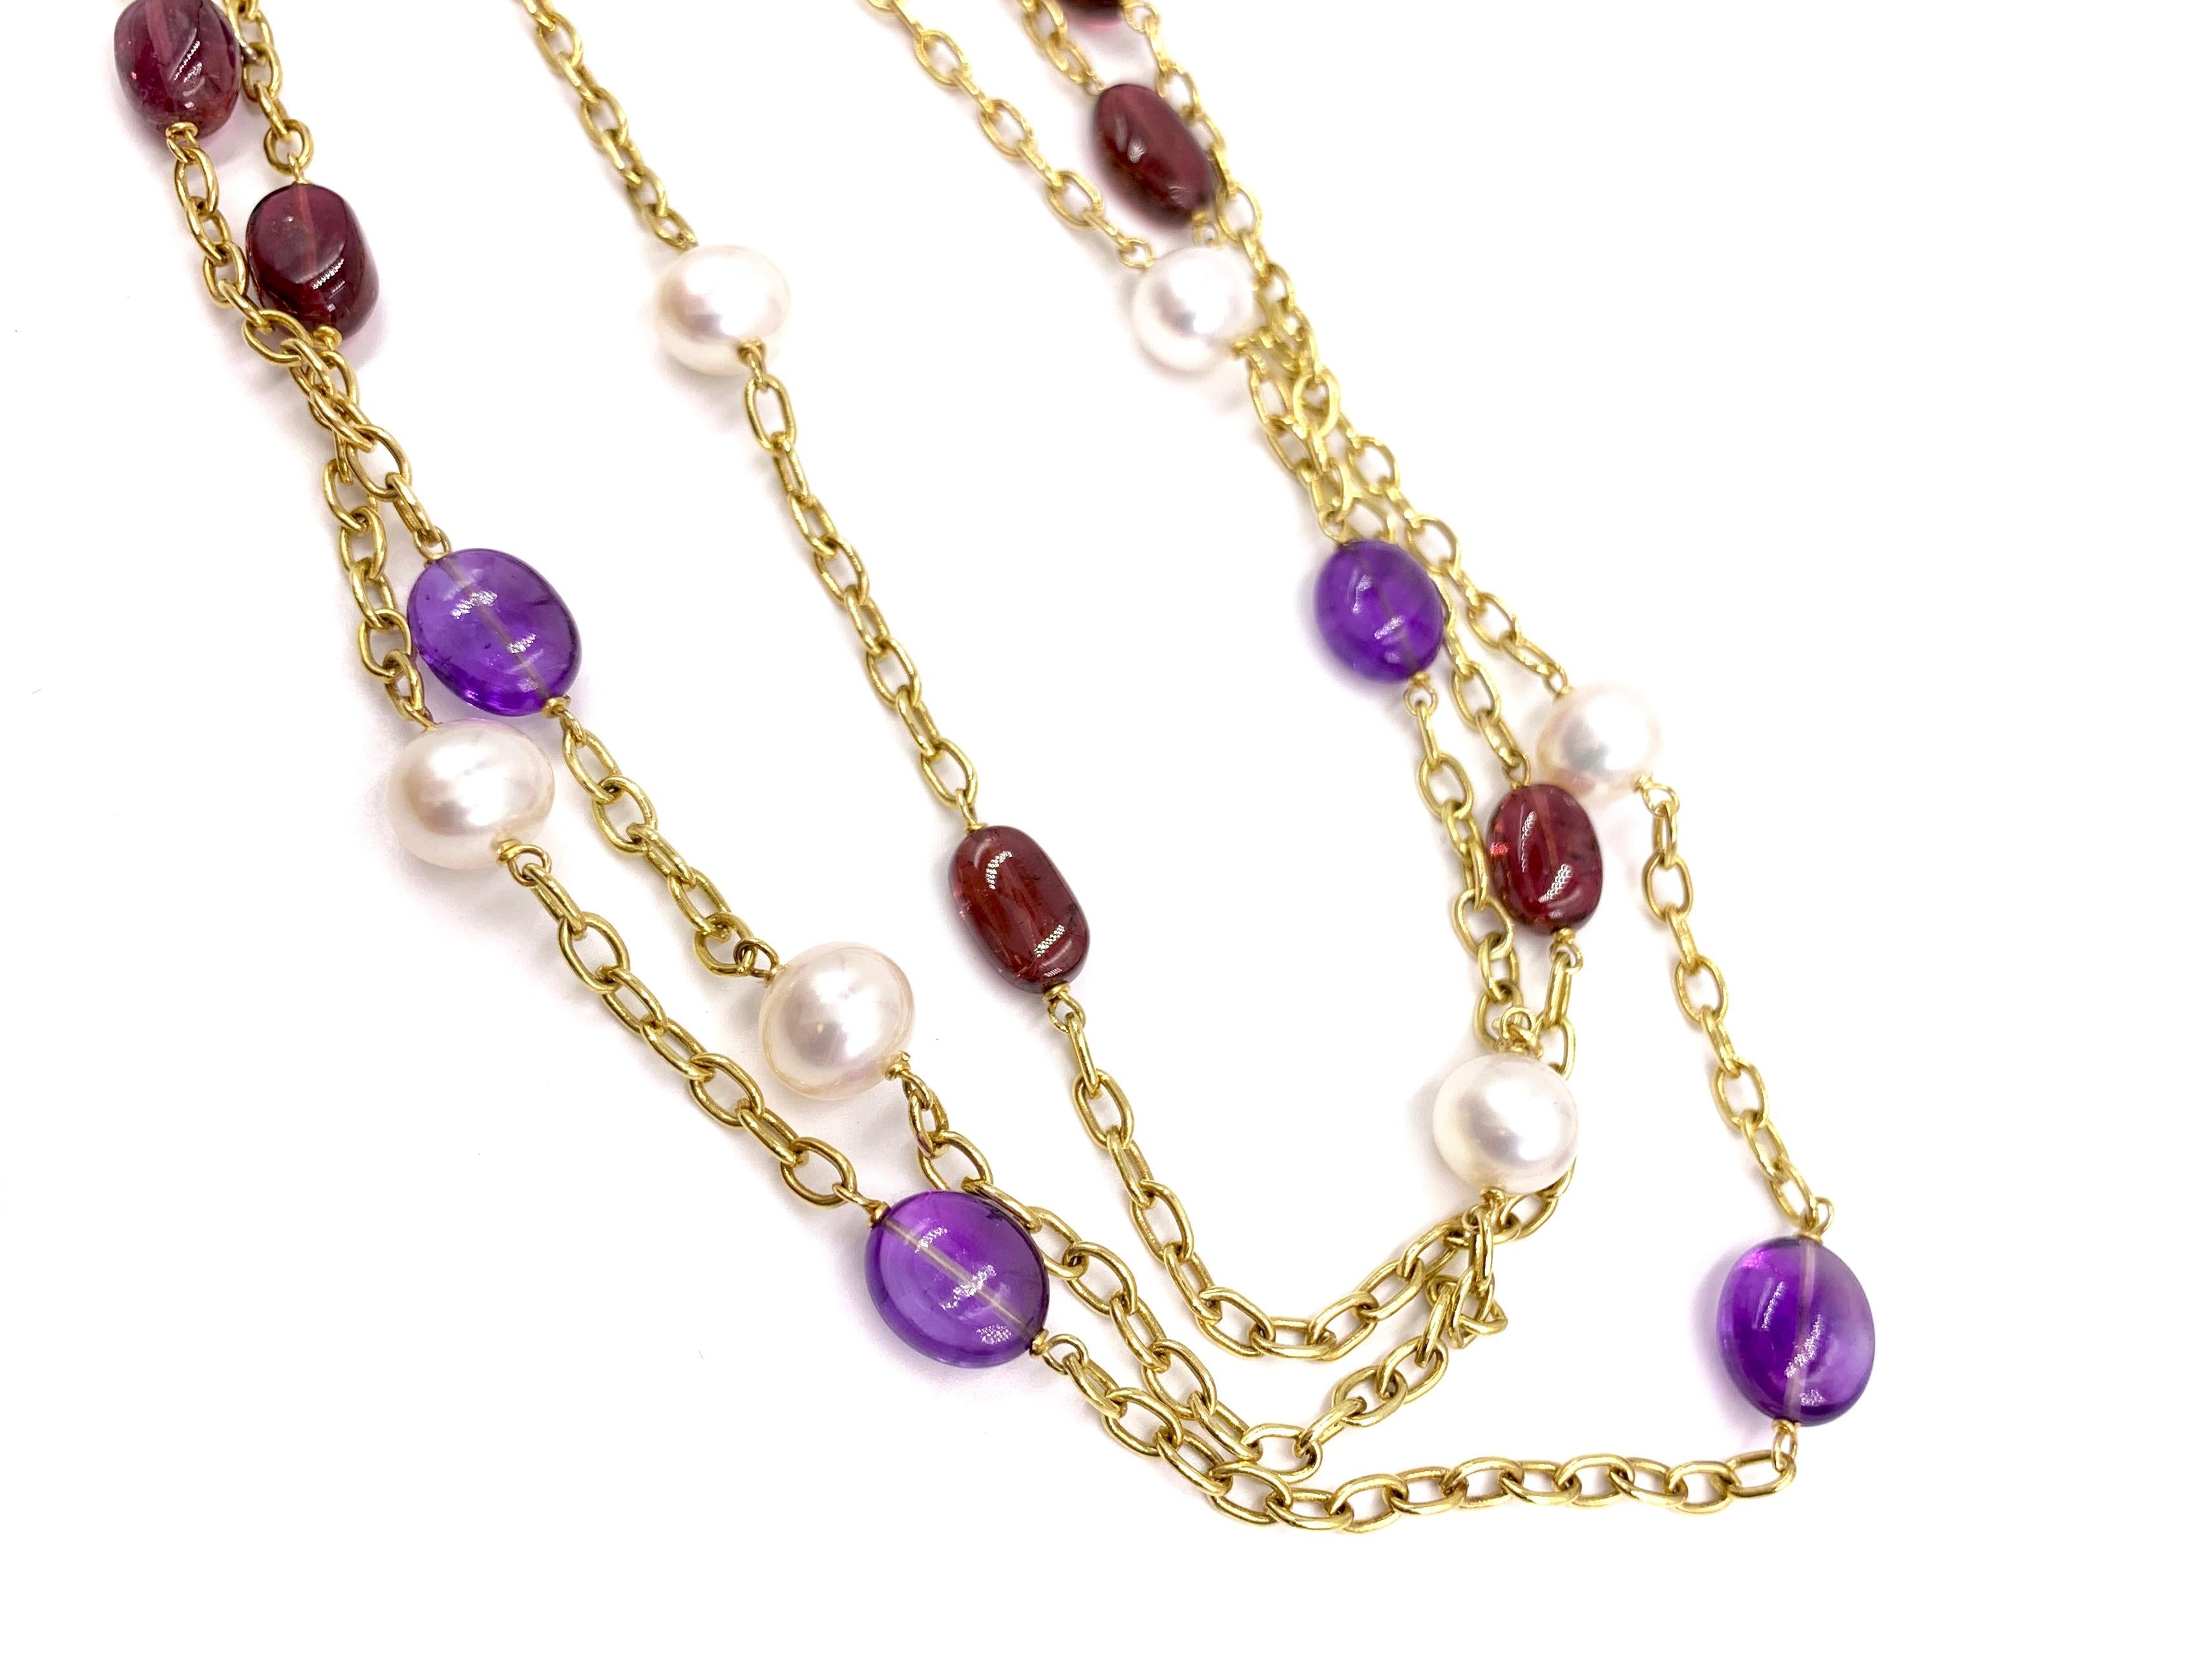 Women's 18 Karat Gold Three-Strand Pearl, Amethyst and Tourmaline Necklace For Sale